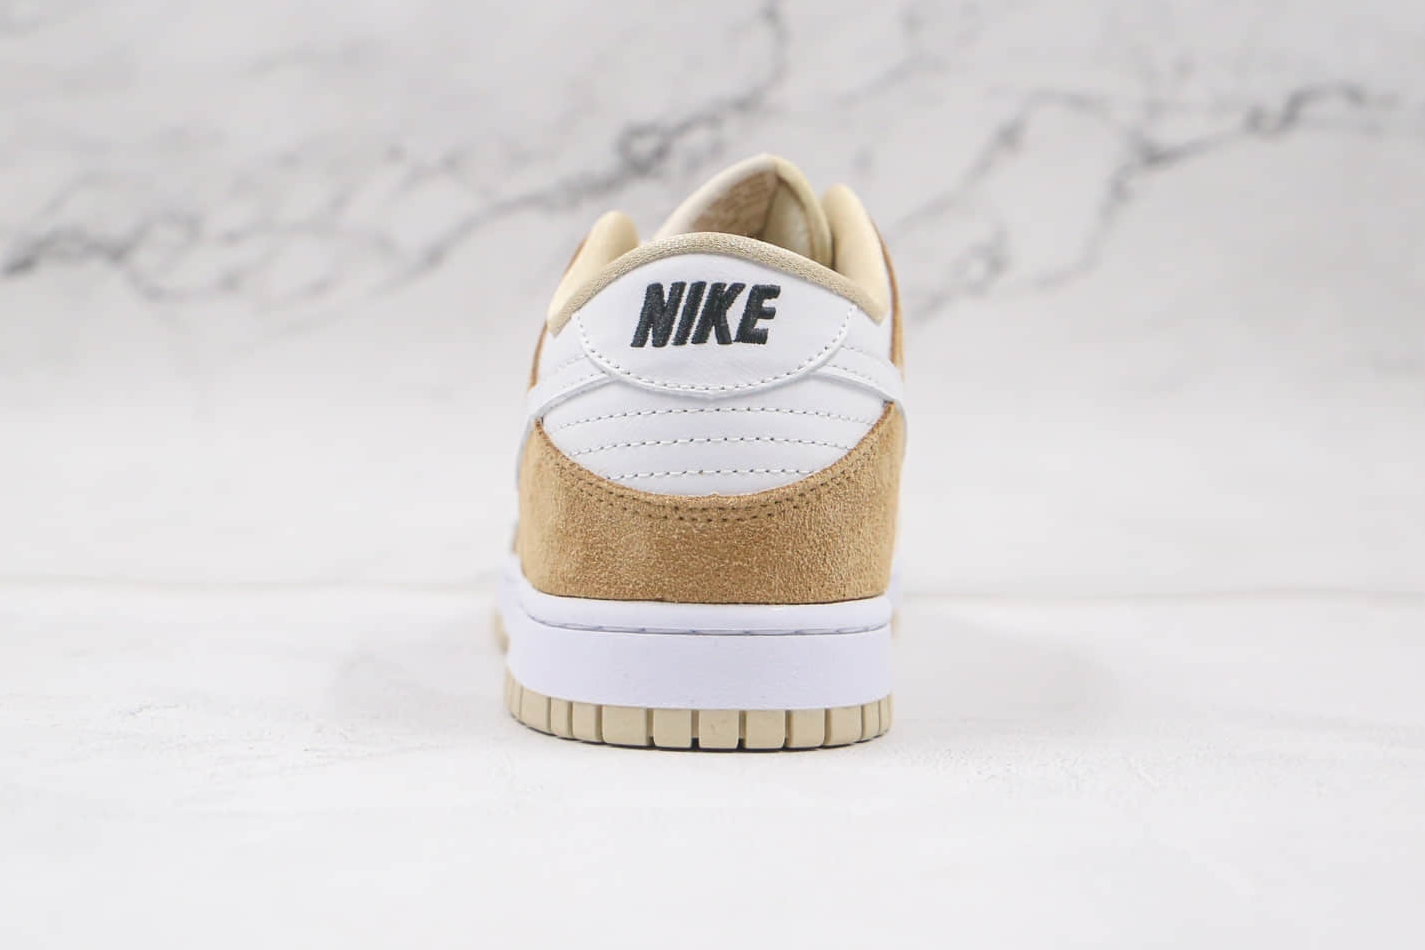 Nike SB Dunk Low PRM White Medium Curry Brown DH7913-002 - Exclusive Stylish Sneakers for Dynamic Comfort!